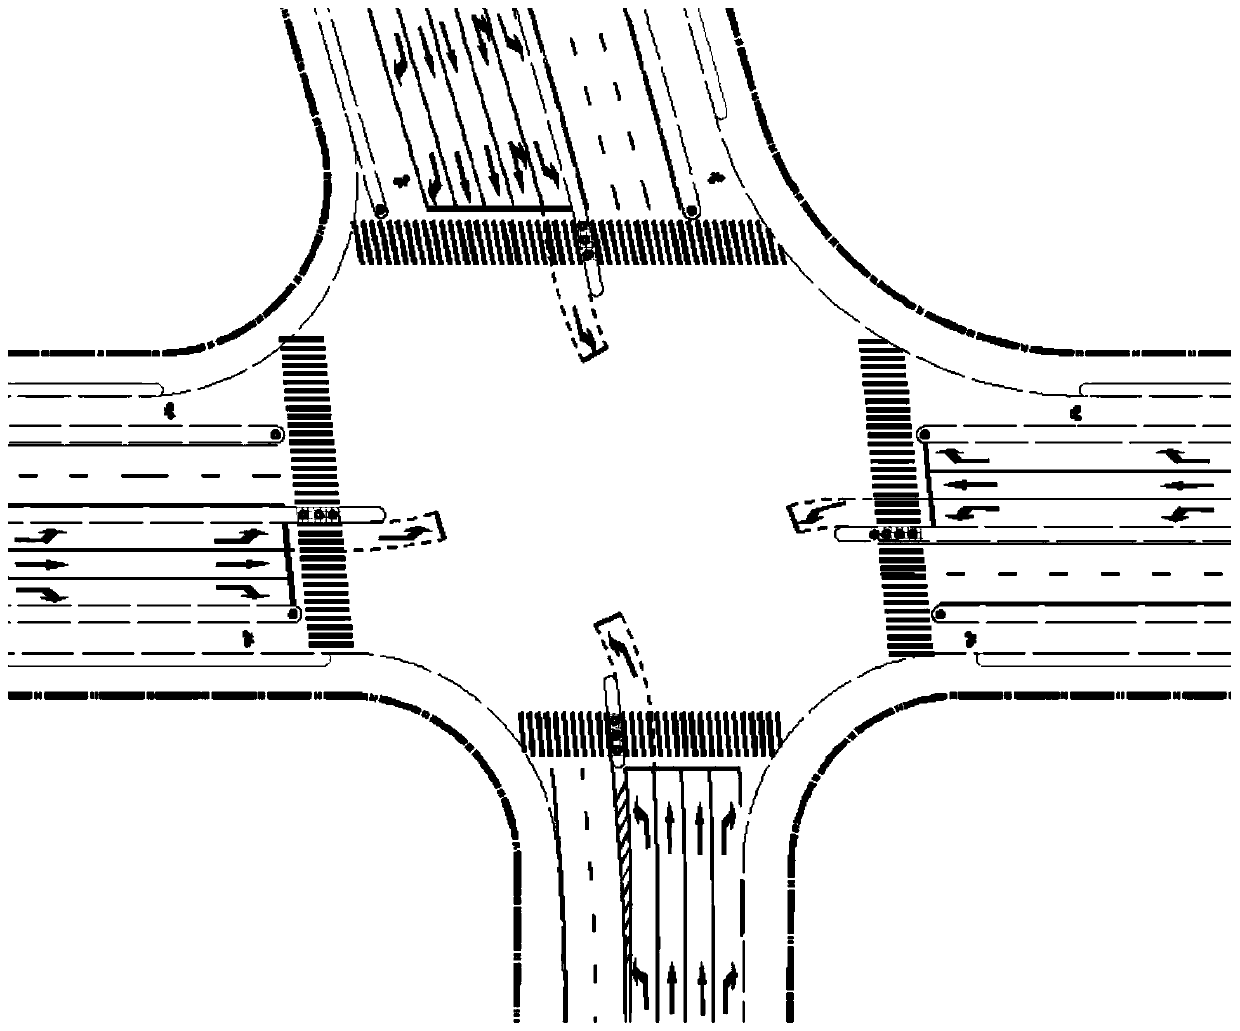 Intersection with non-motor vehicle left-turn waiting areas